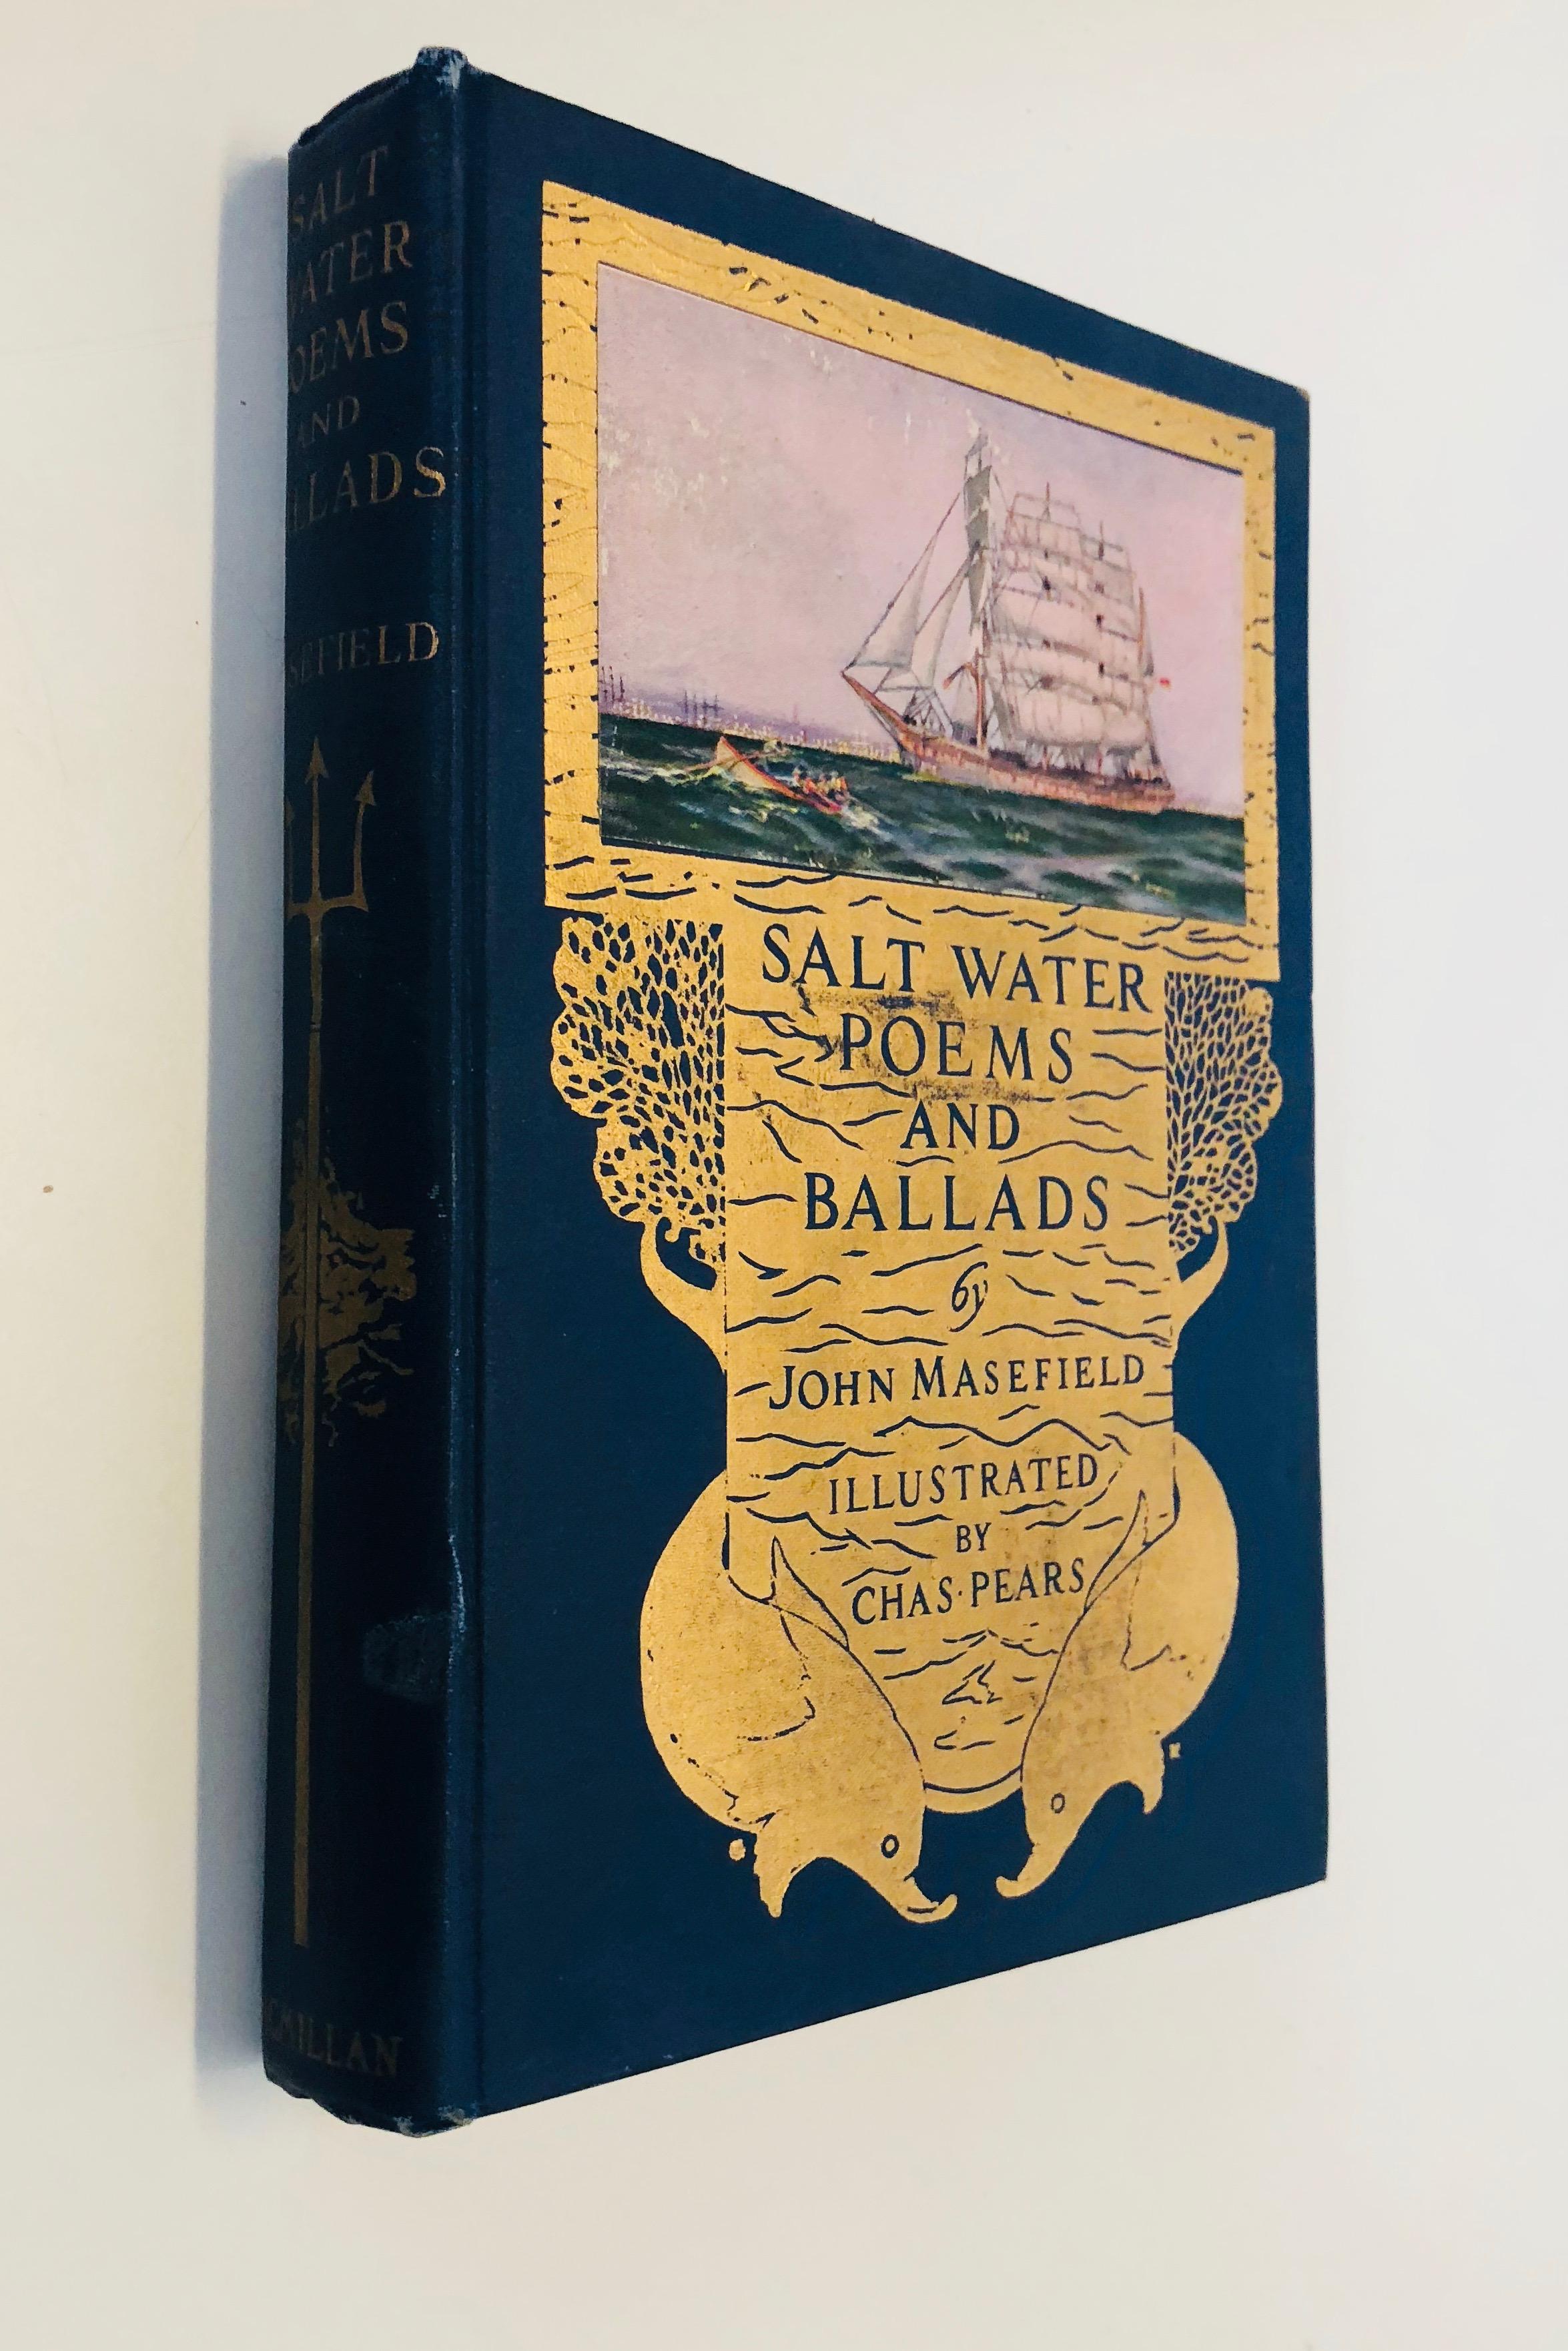 SALT-WATER Poems and Ballads by John Masefield (c.1920)